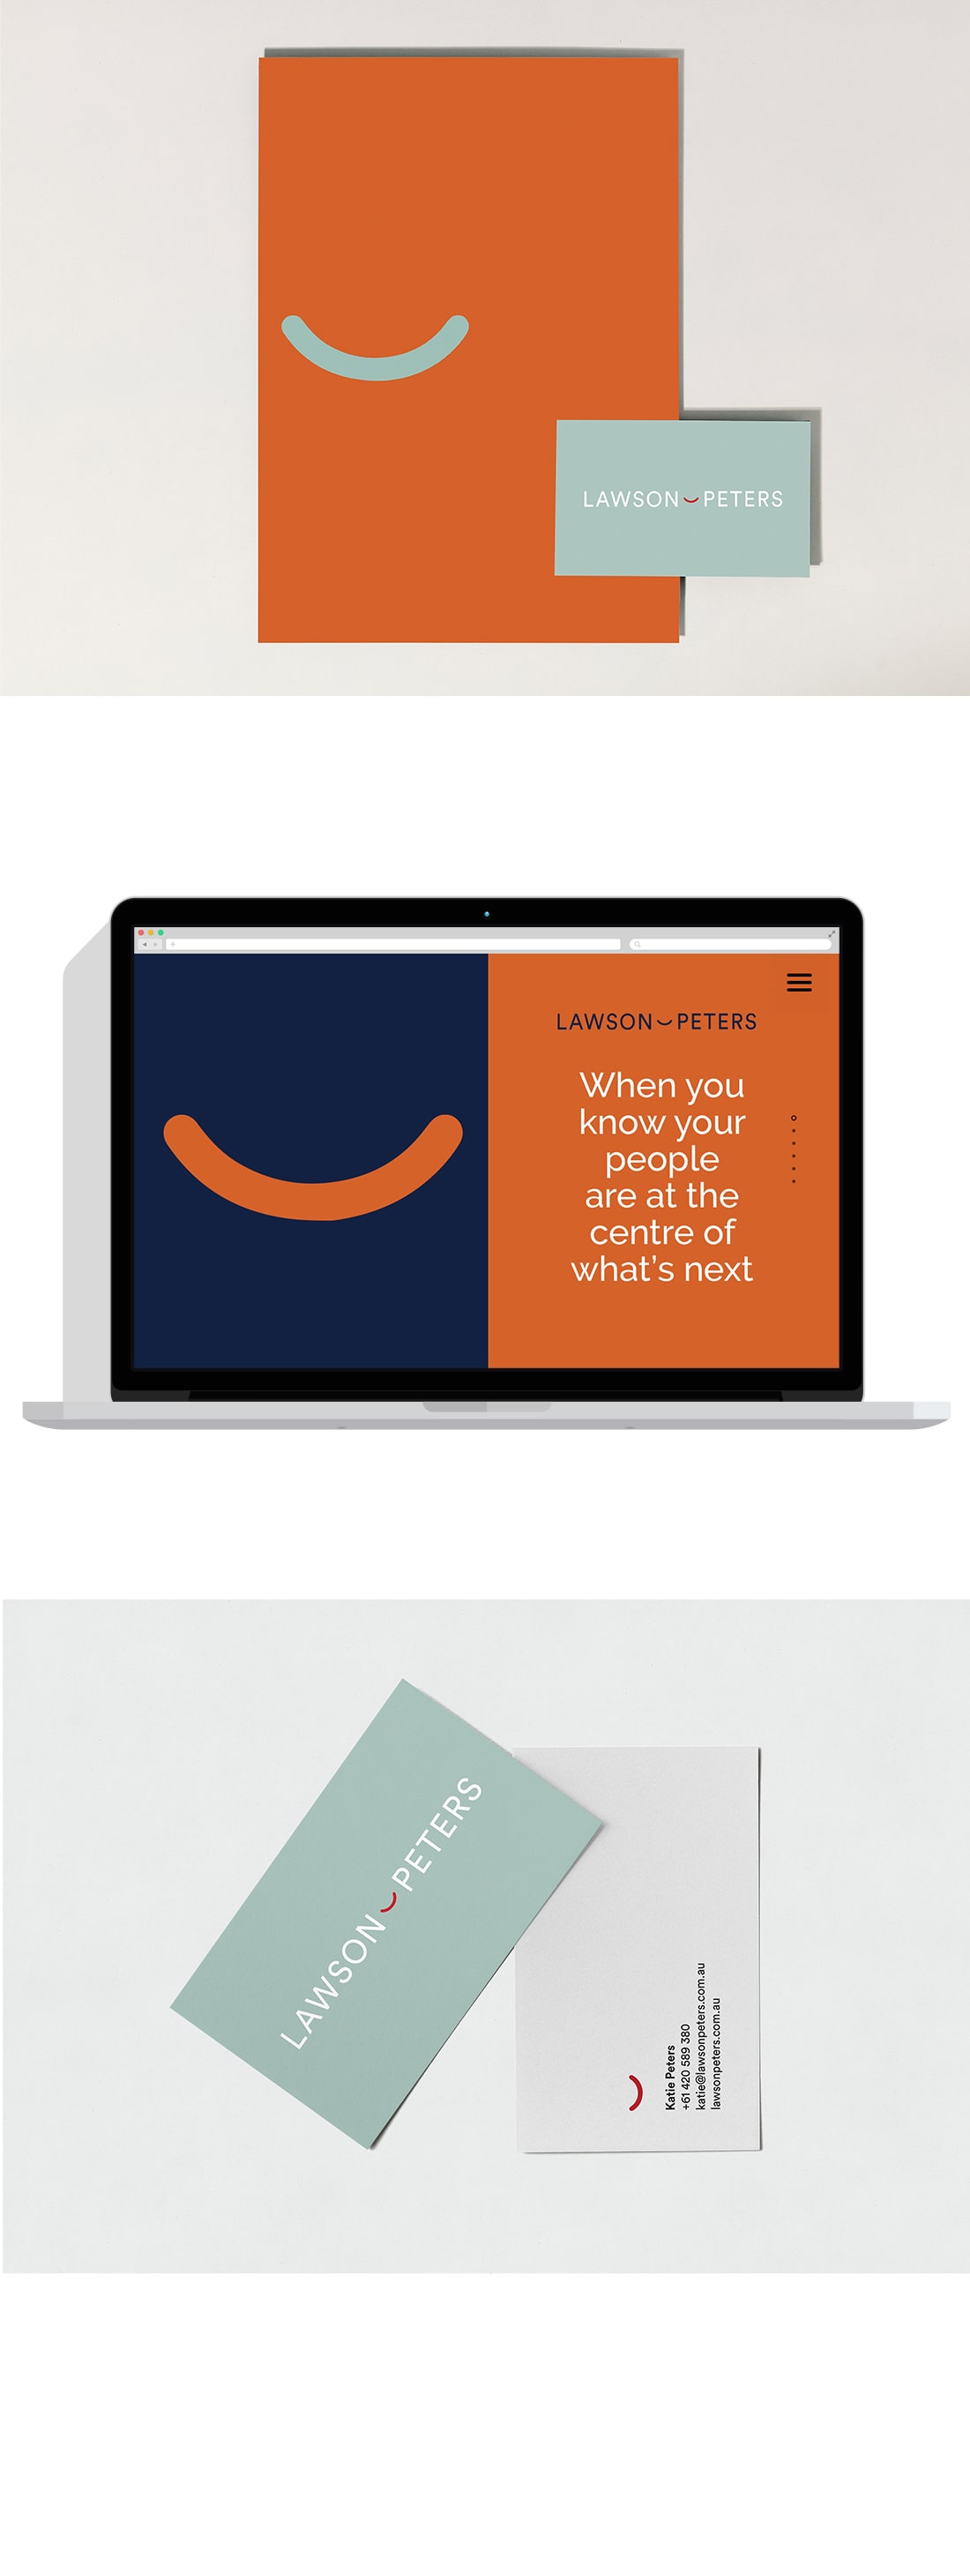 images of stationary, webpage and business cards using the branding for Lawson and Peters